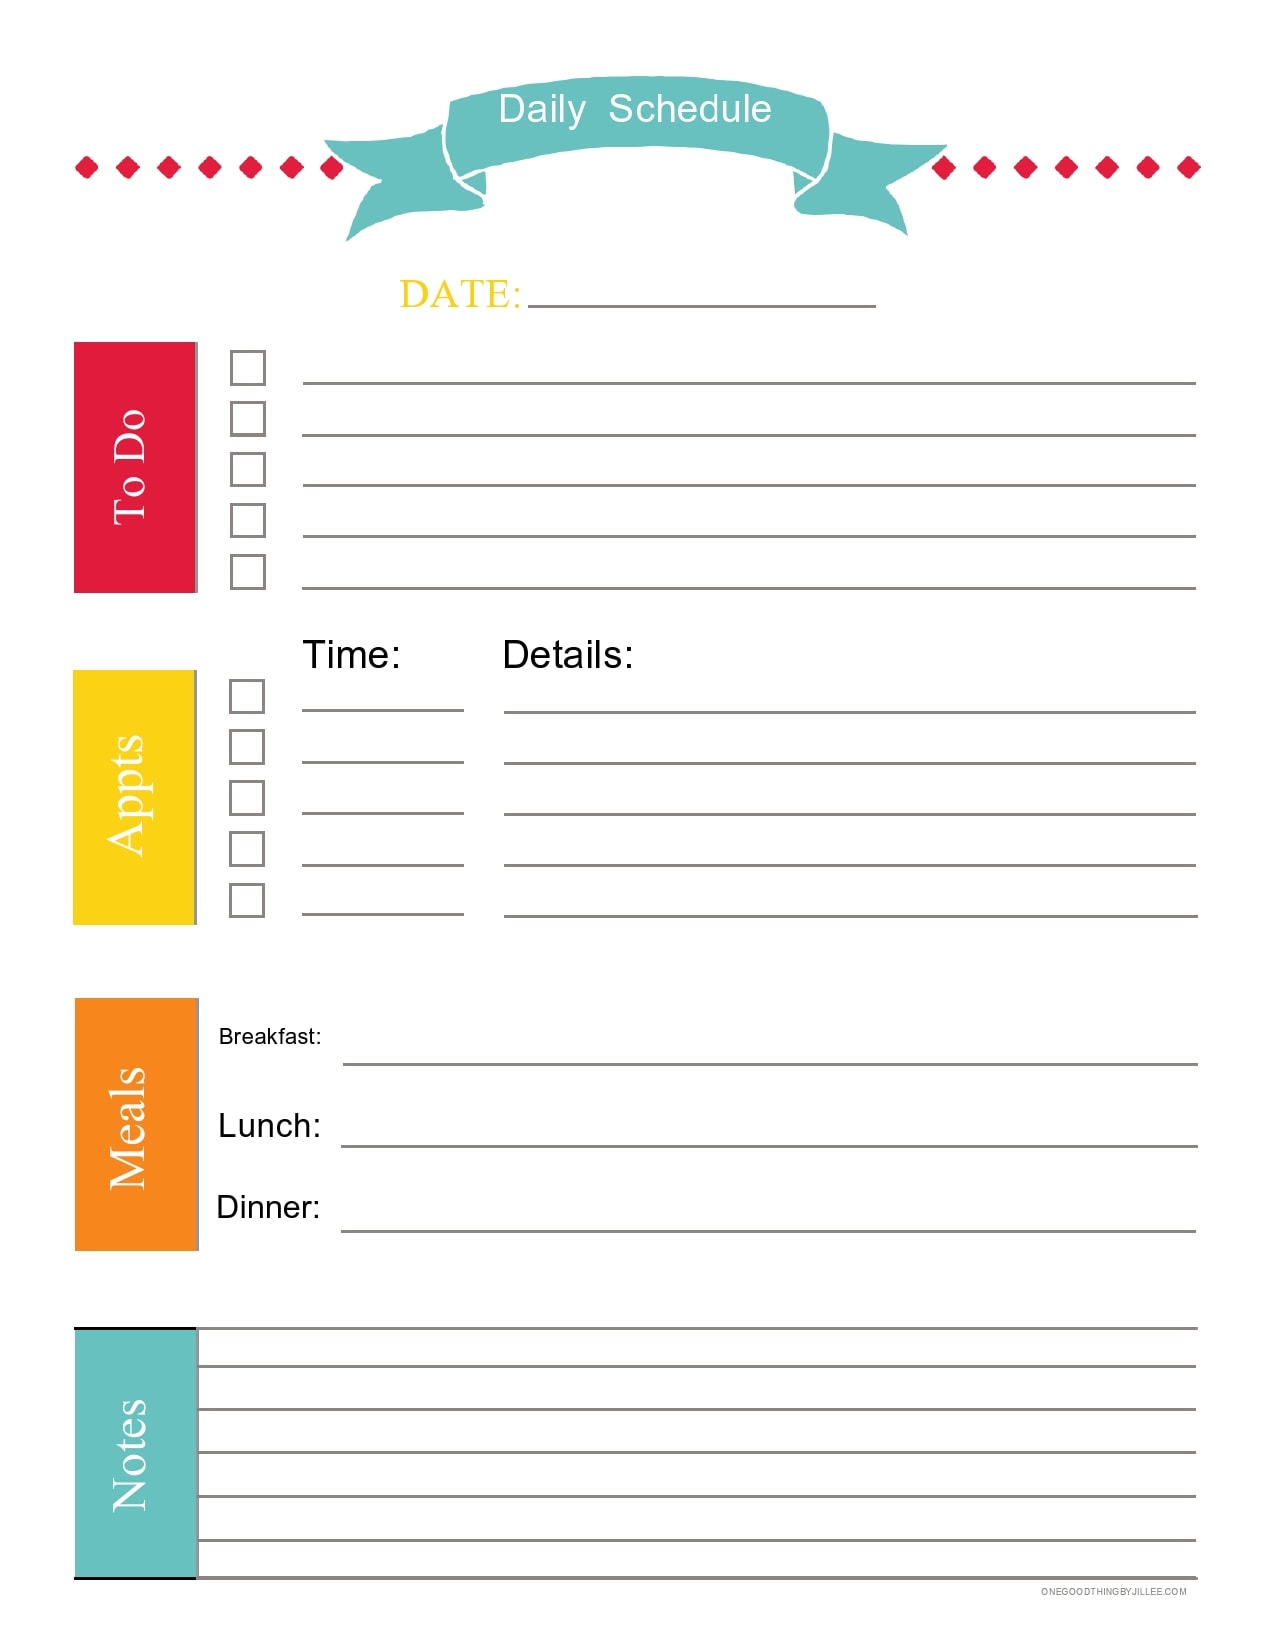 free daily schedule templates